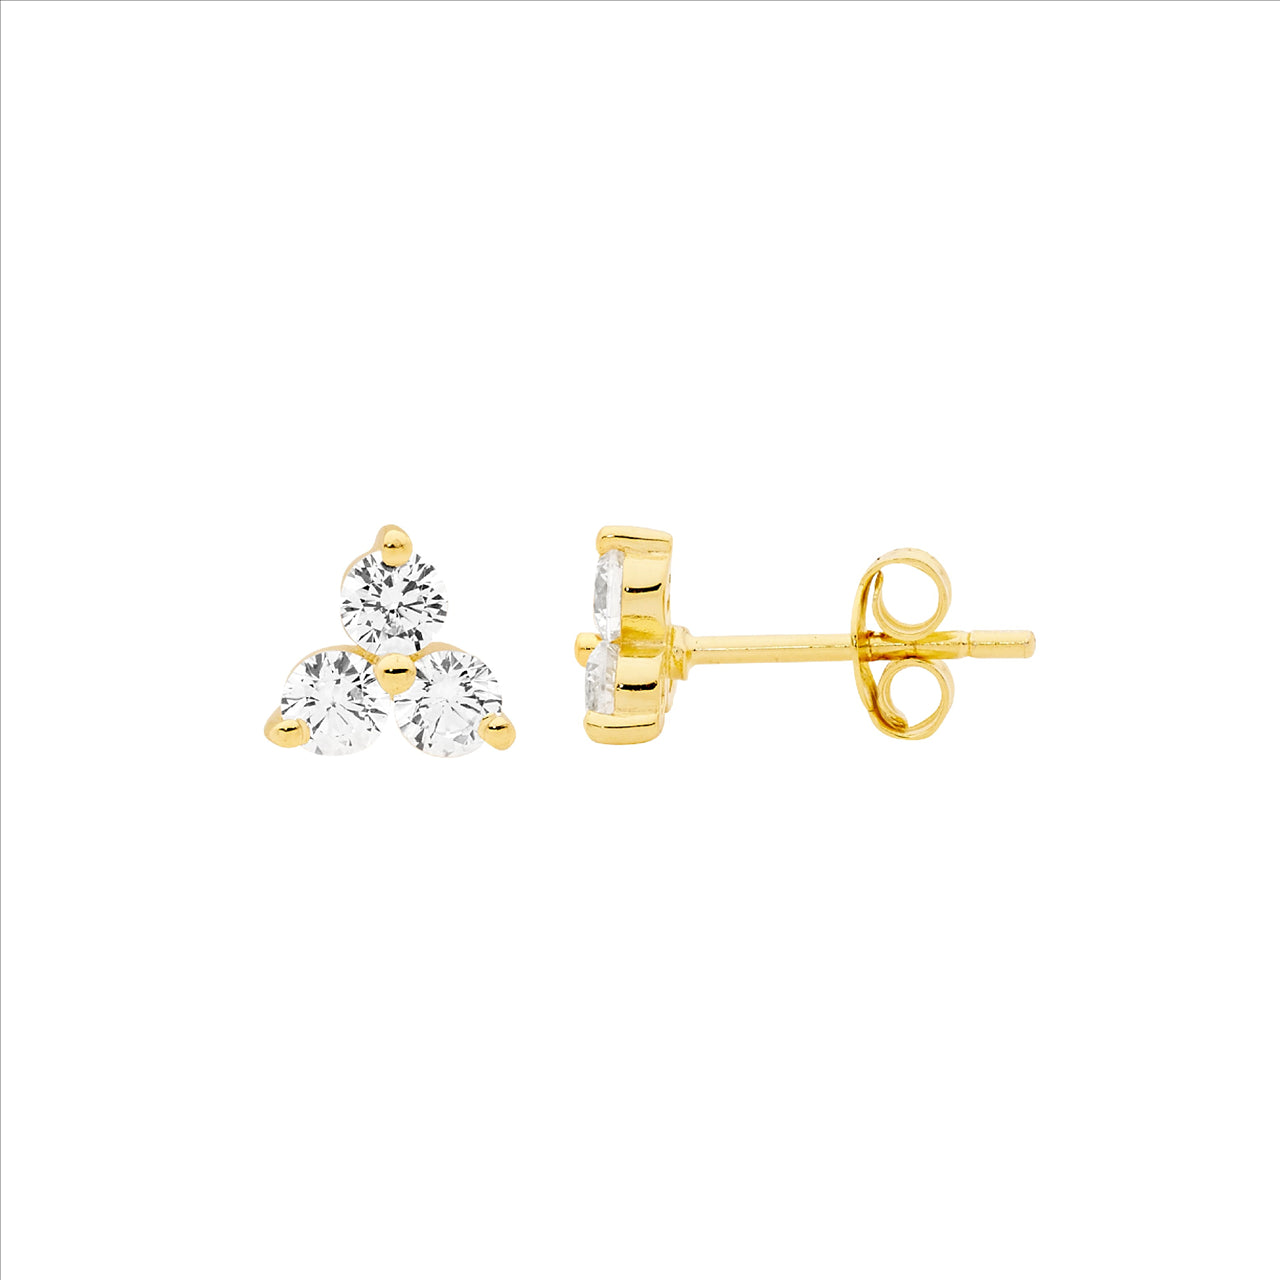 Cubic zirconia Triangle Stud Earrings - Yellow gold Plate.